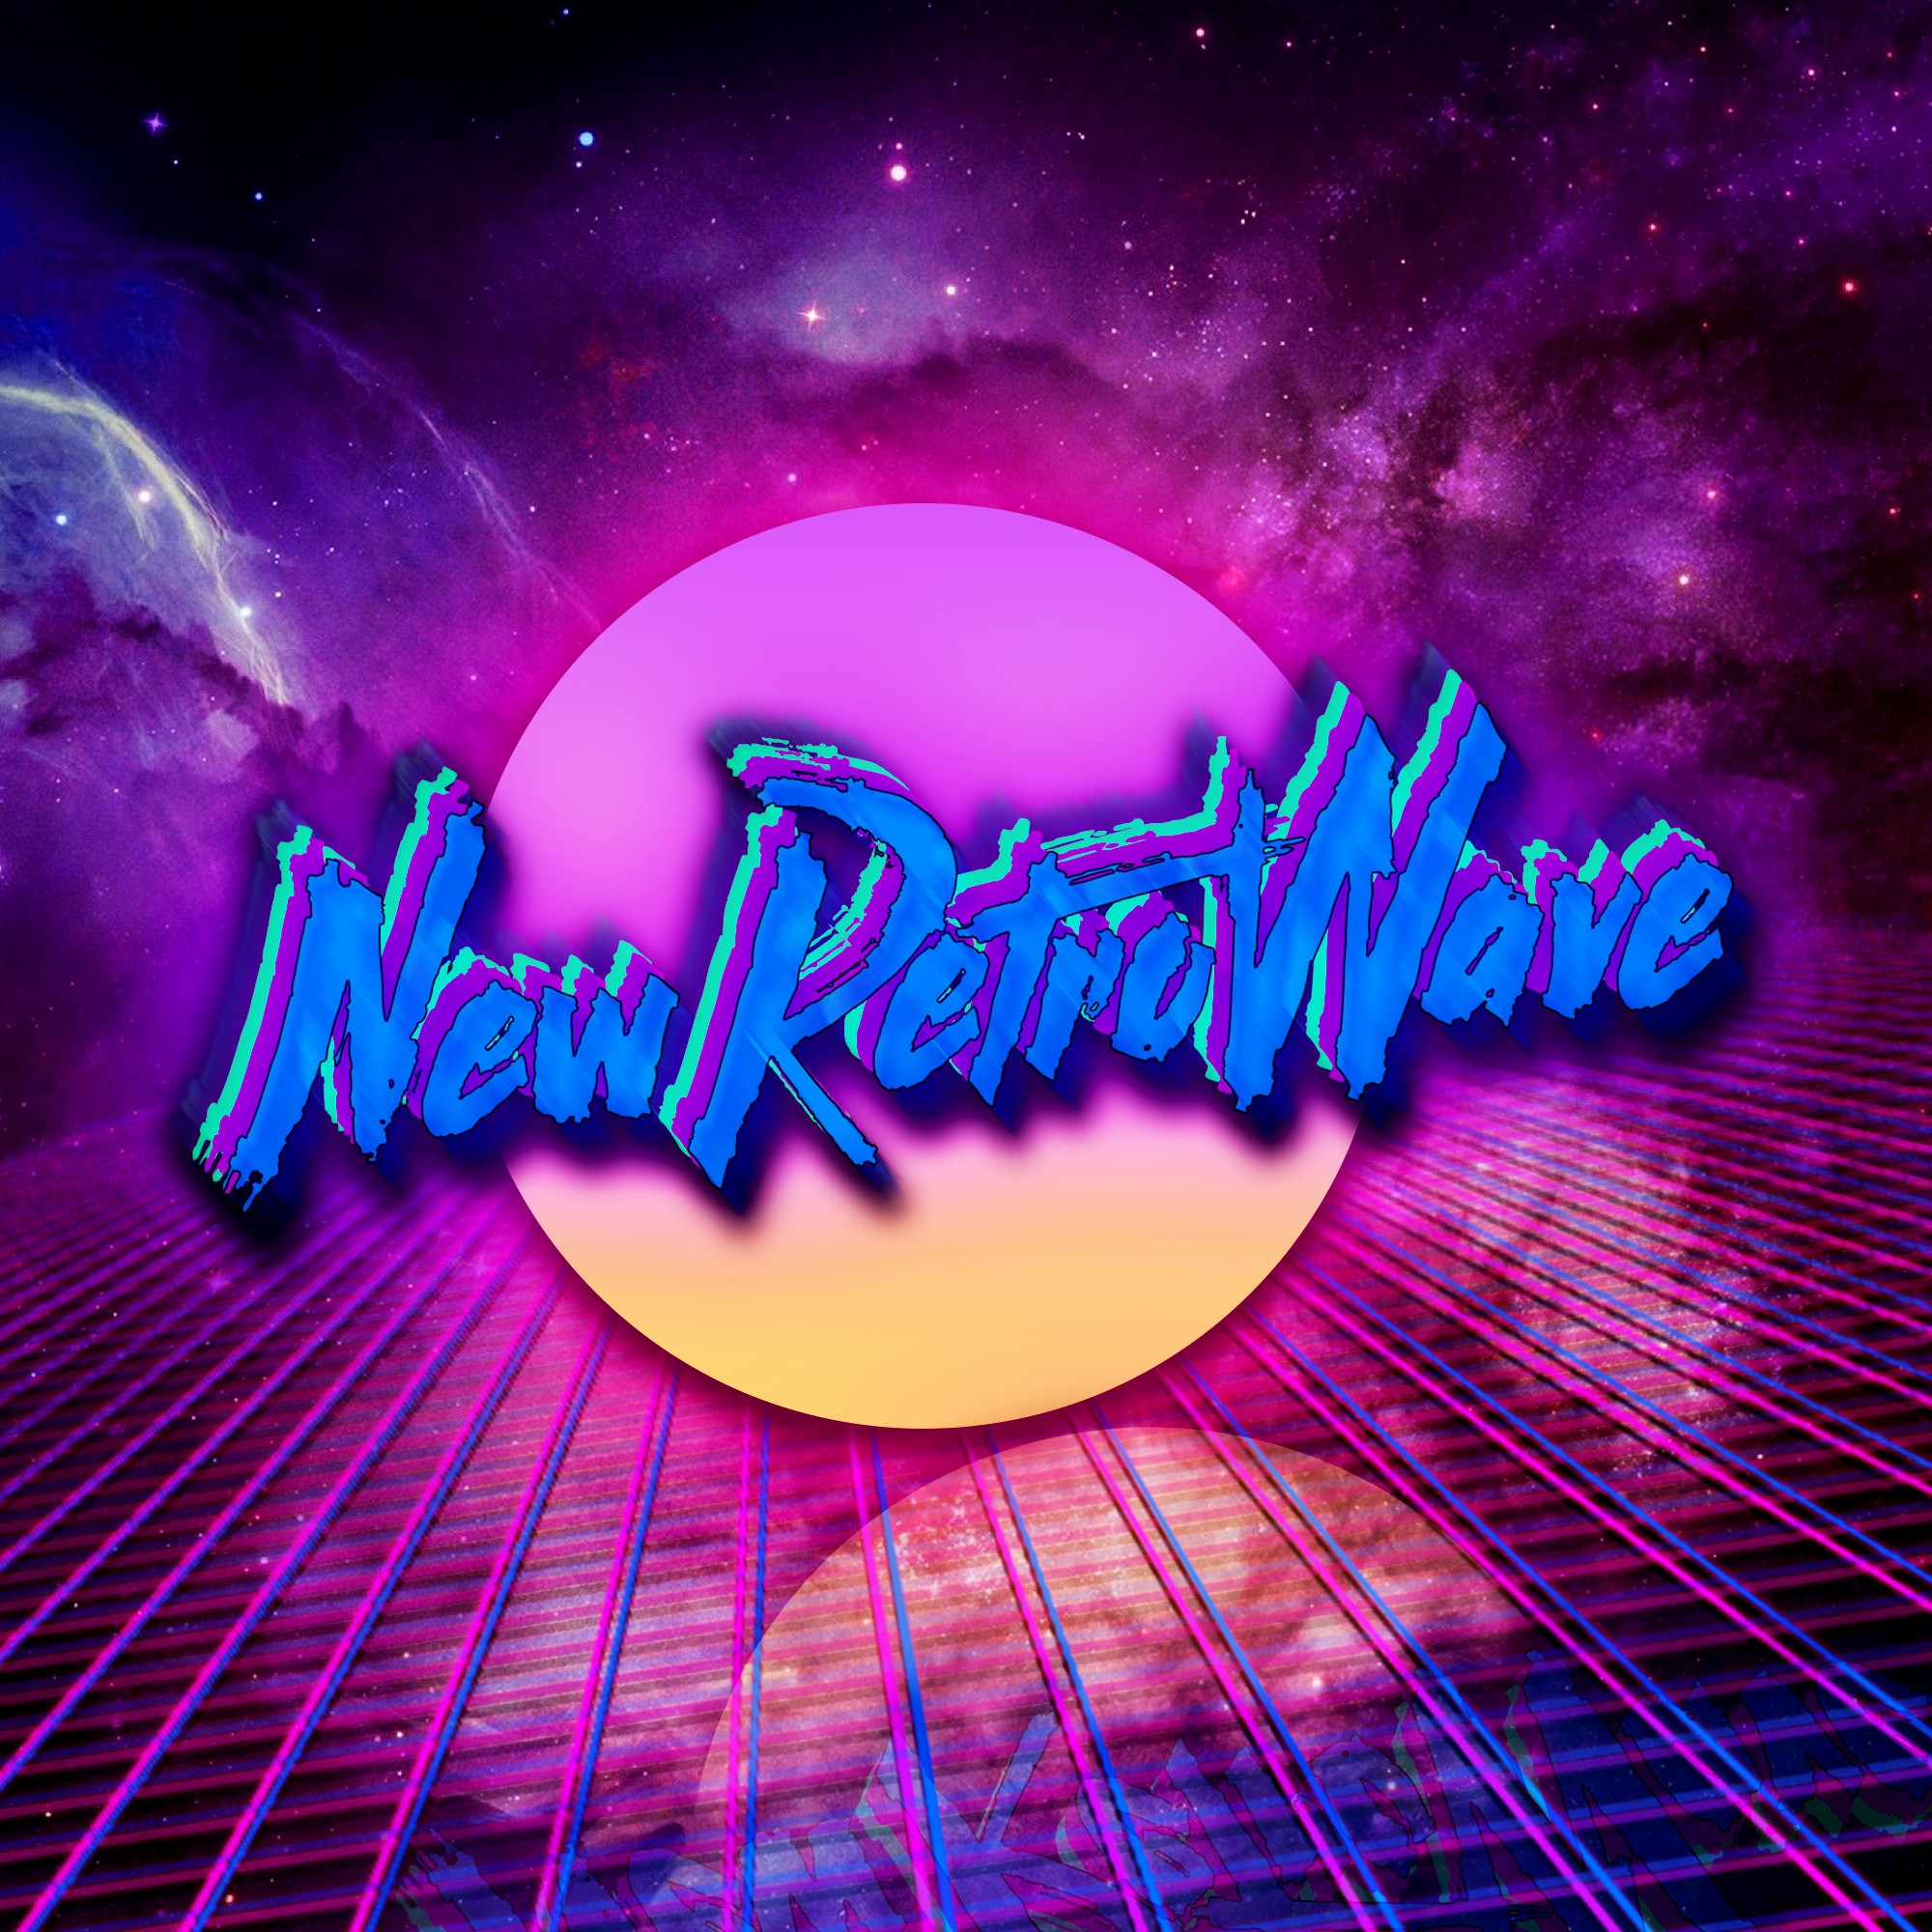 General 2000x2000 New Retro Wave neon space 1980s synthwave digital art typography